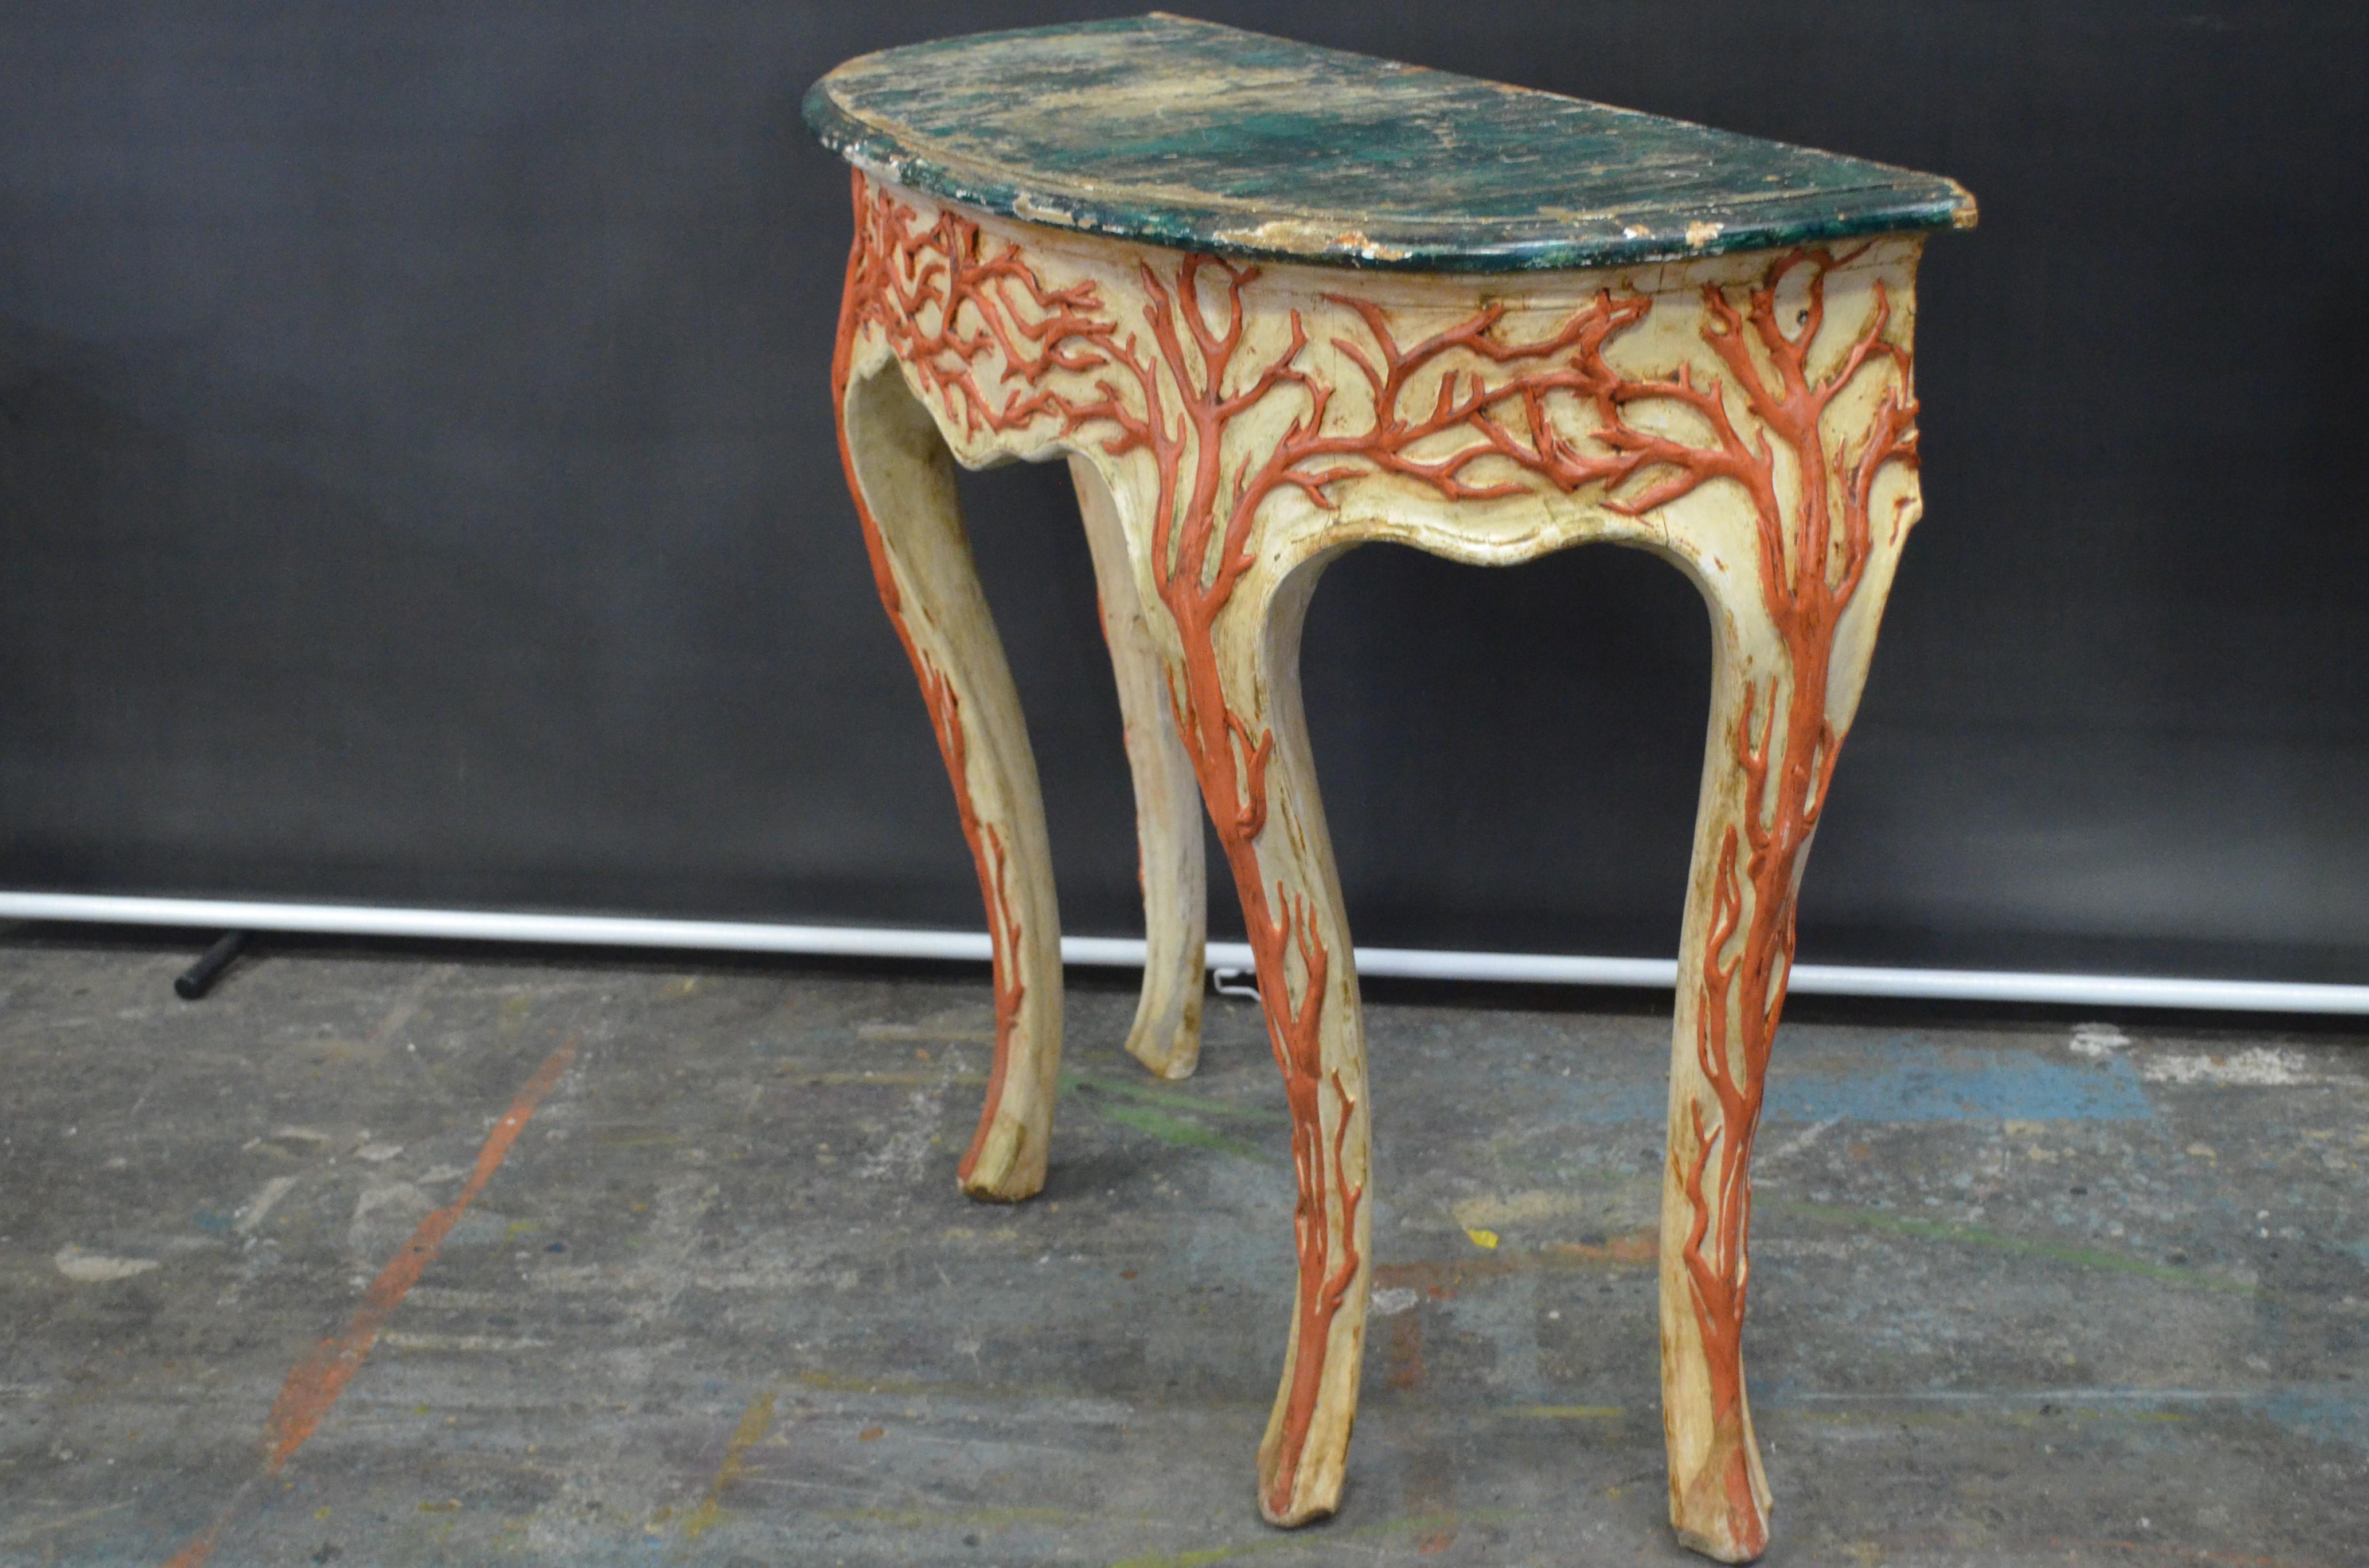 Hand-Carved Italian Cabriole Leg Console with Carved Faux Coral Motifs & Faux Marble Top